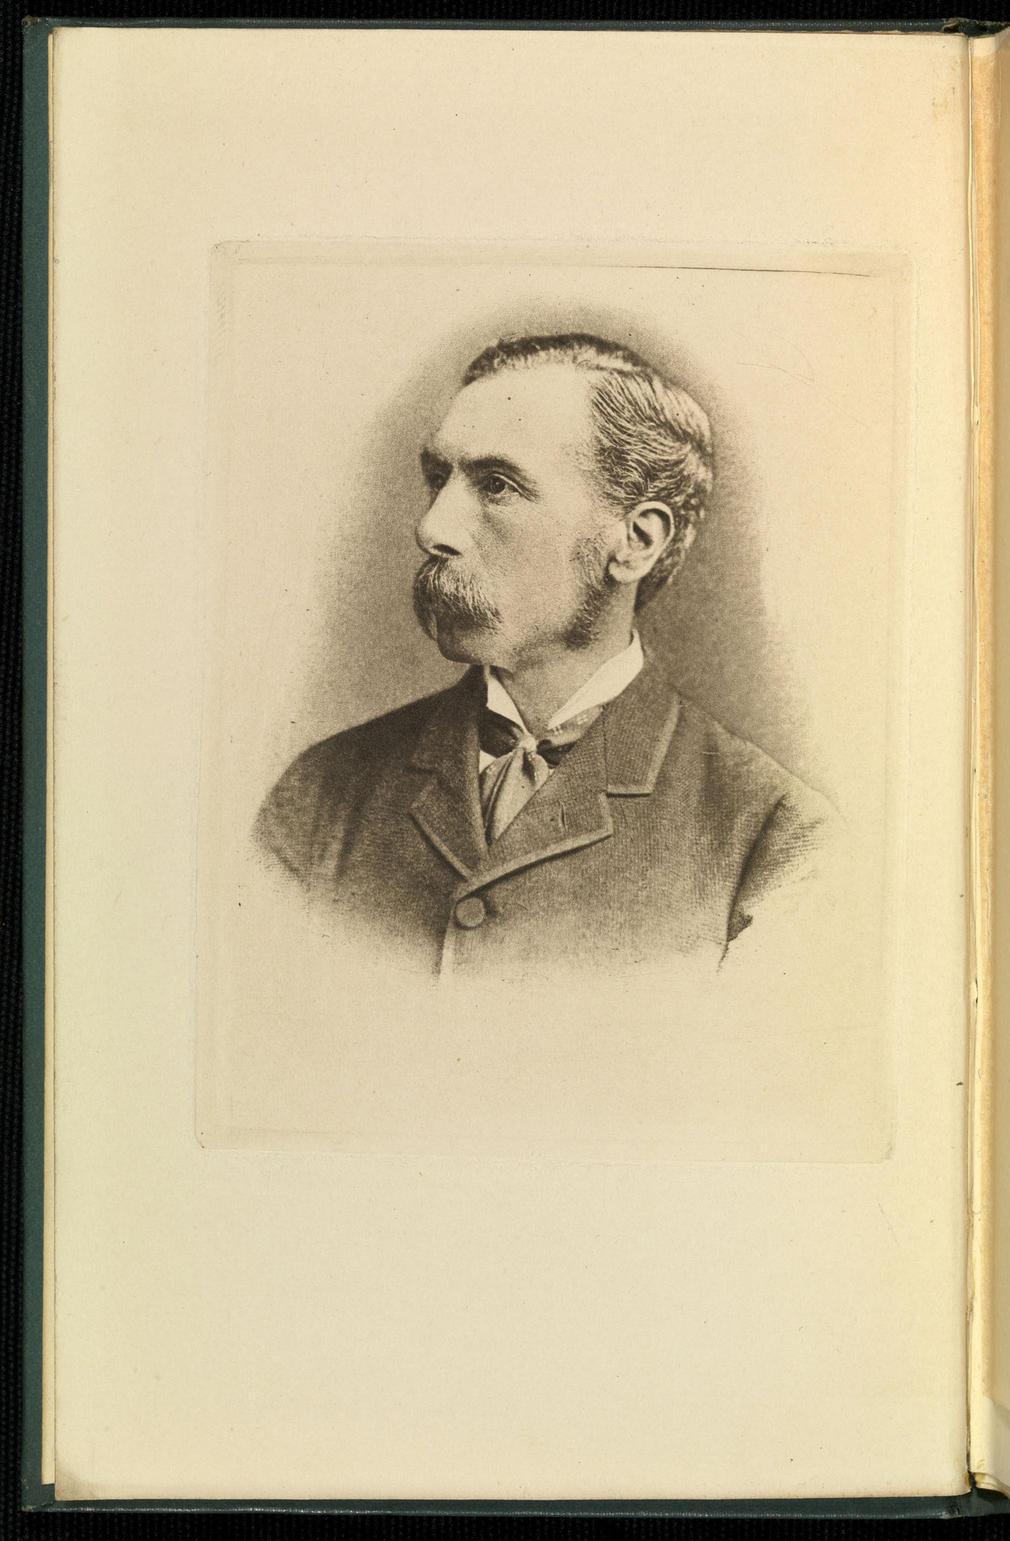 Alfred Austin (1835–1913) was a writer and poet. He wrote for many years for the Conservative paper The Standard, and held the position of Poet Laureate from 1896 until his death in 1913.